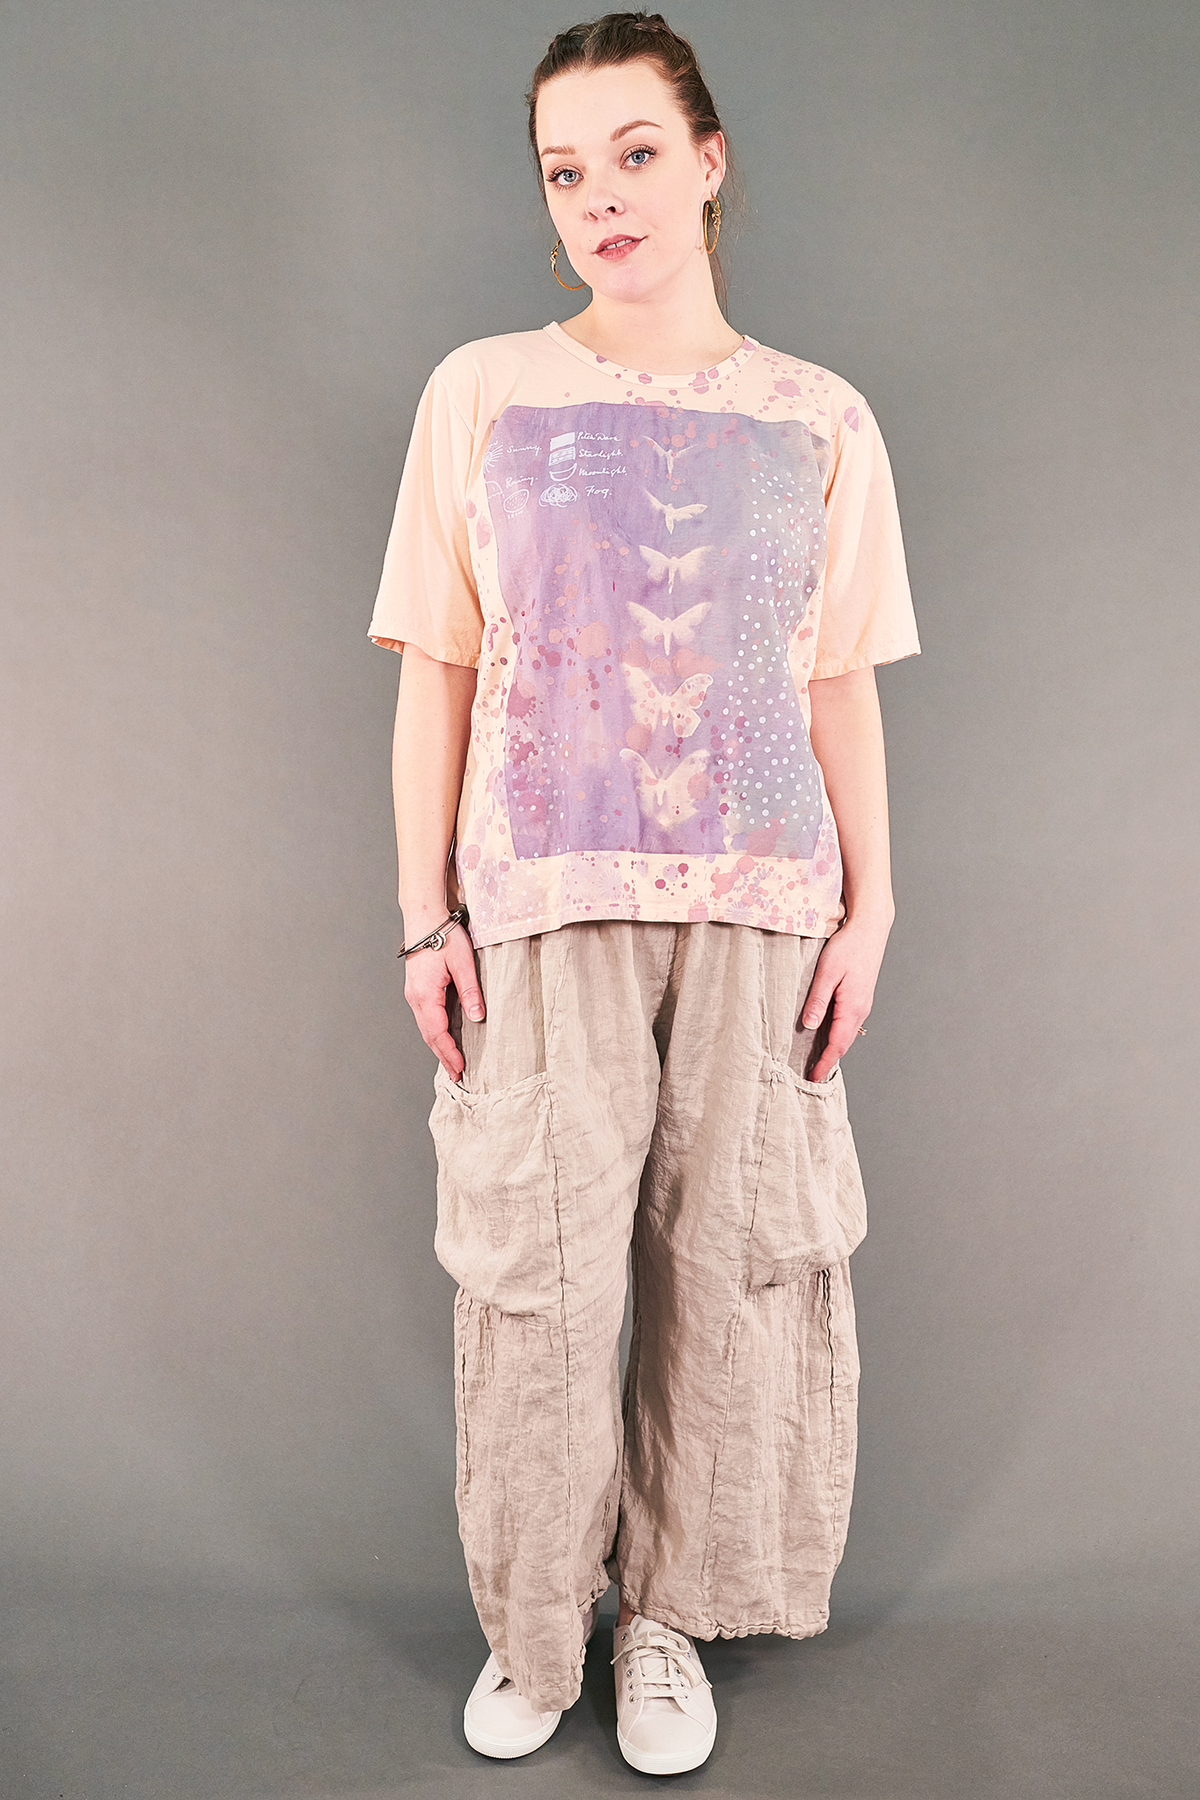 1144-s/s Simple Tee Hushed Pink-P